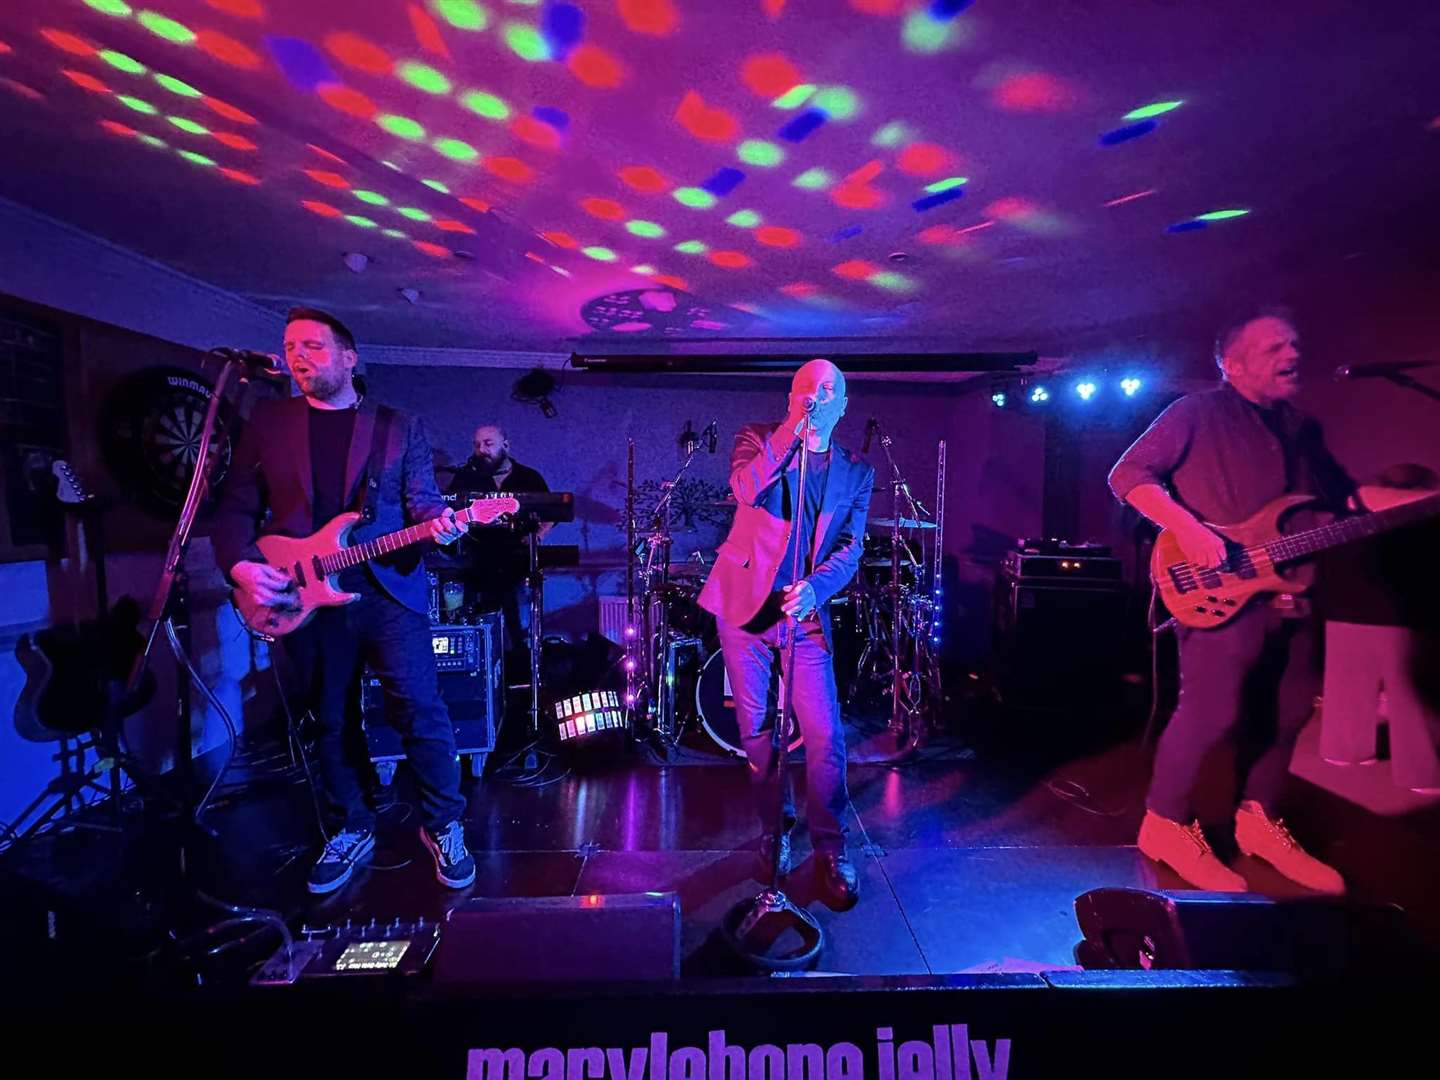 Popular Swale party band Marylebone Jelly making their debut at Marden Club in January. They are returning for the beer festival in October